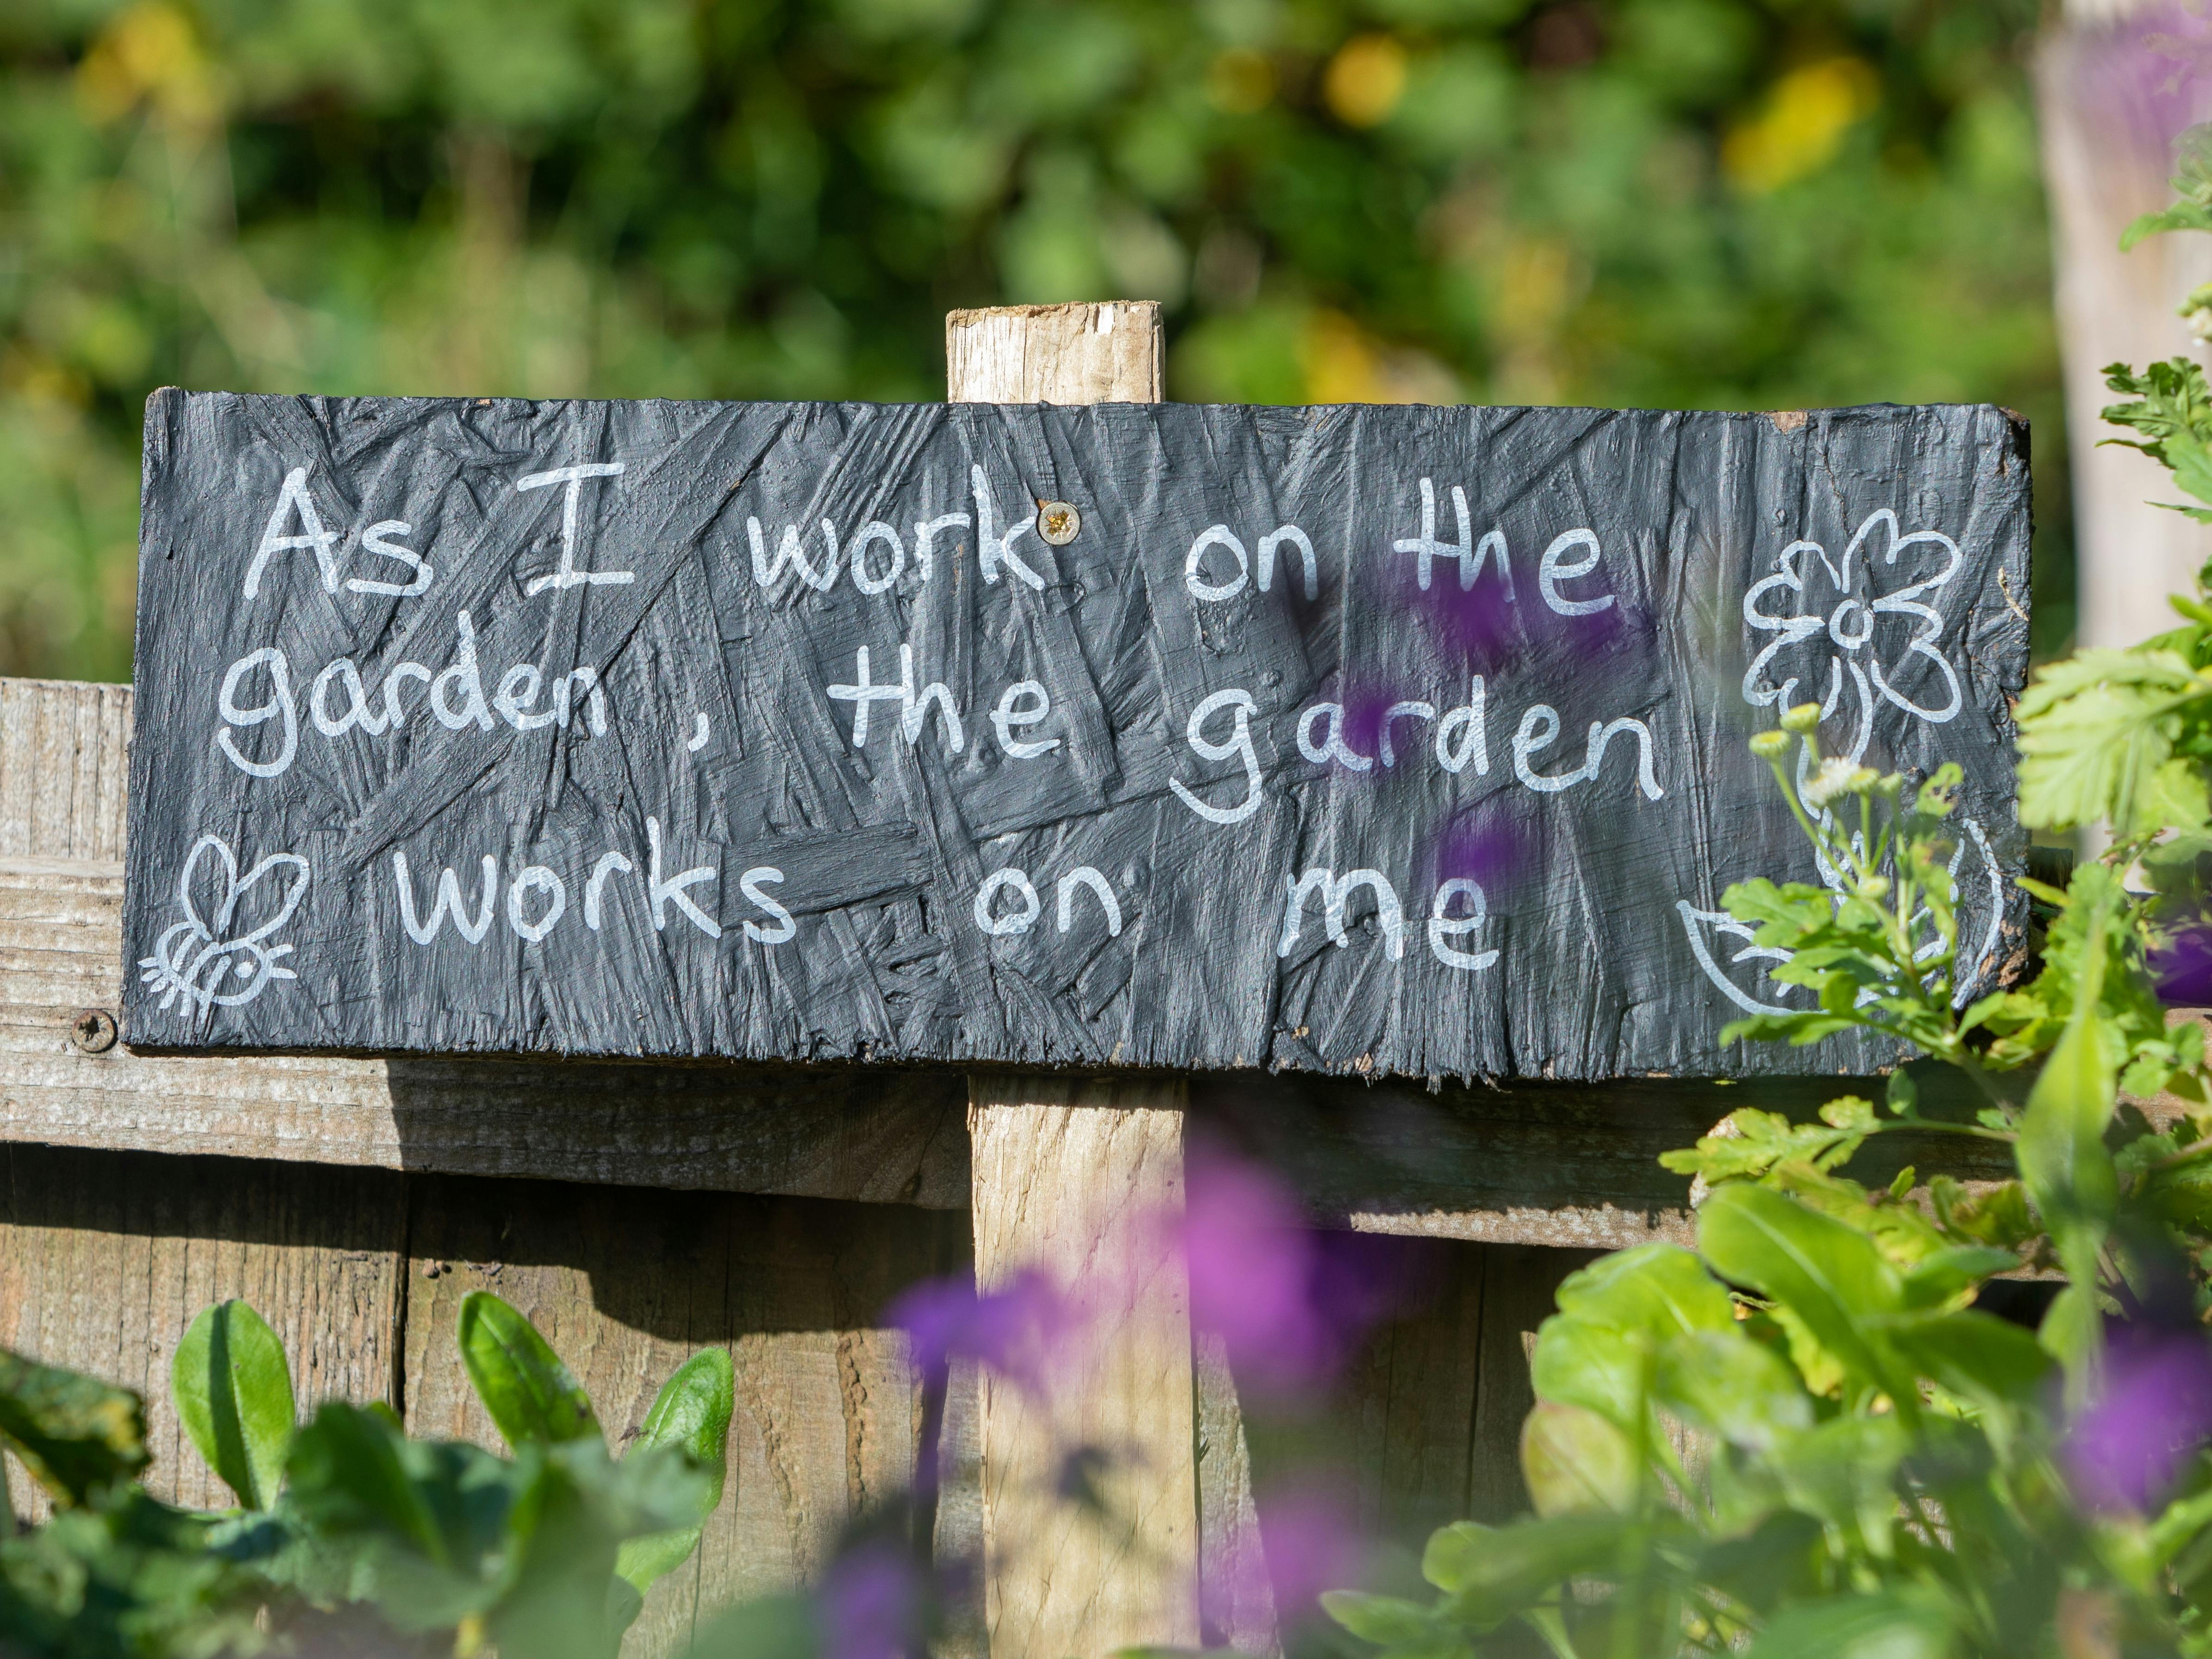 Garden sign with the words As I work on the garden, the garden works on me' with purple flowers and other live greenery in the foreground